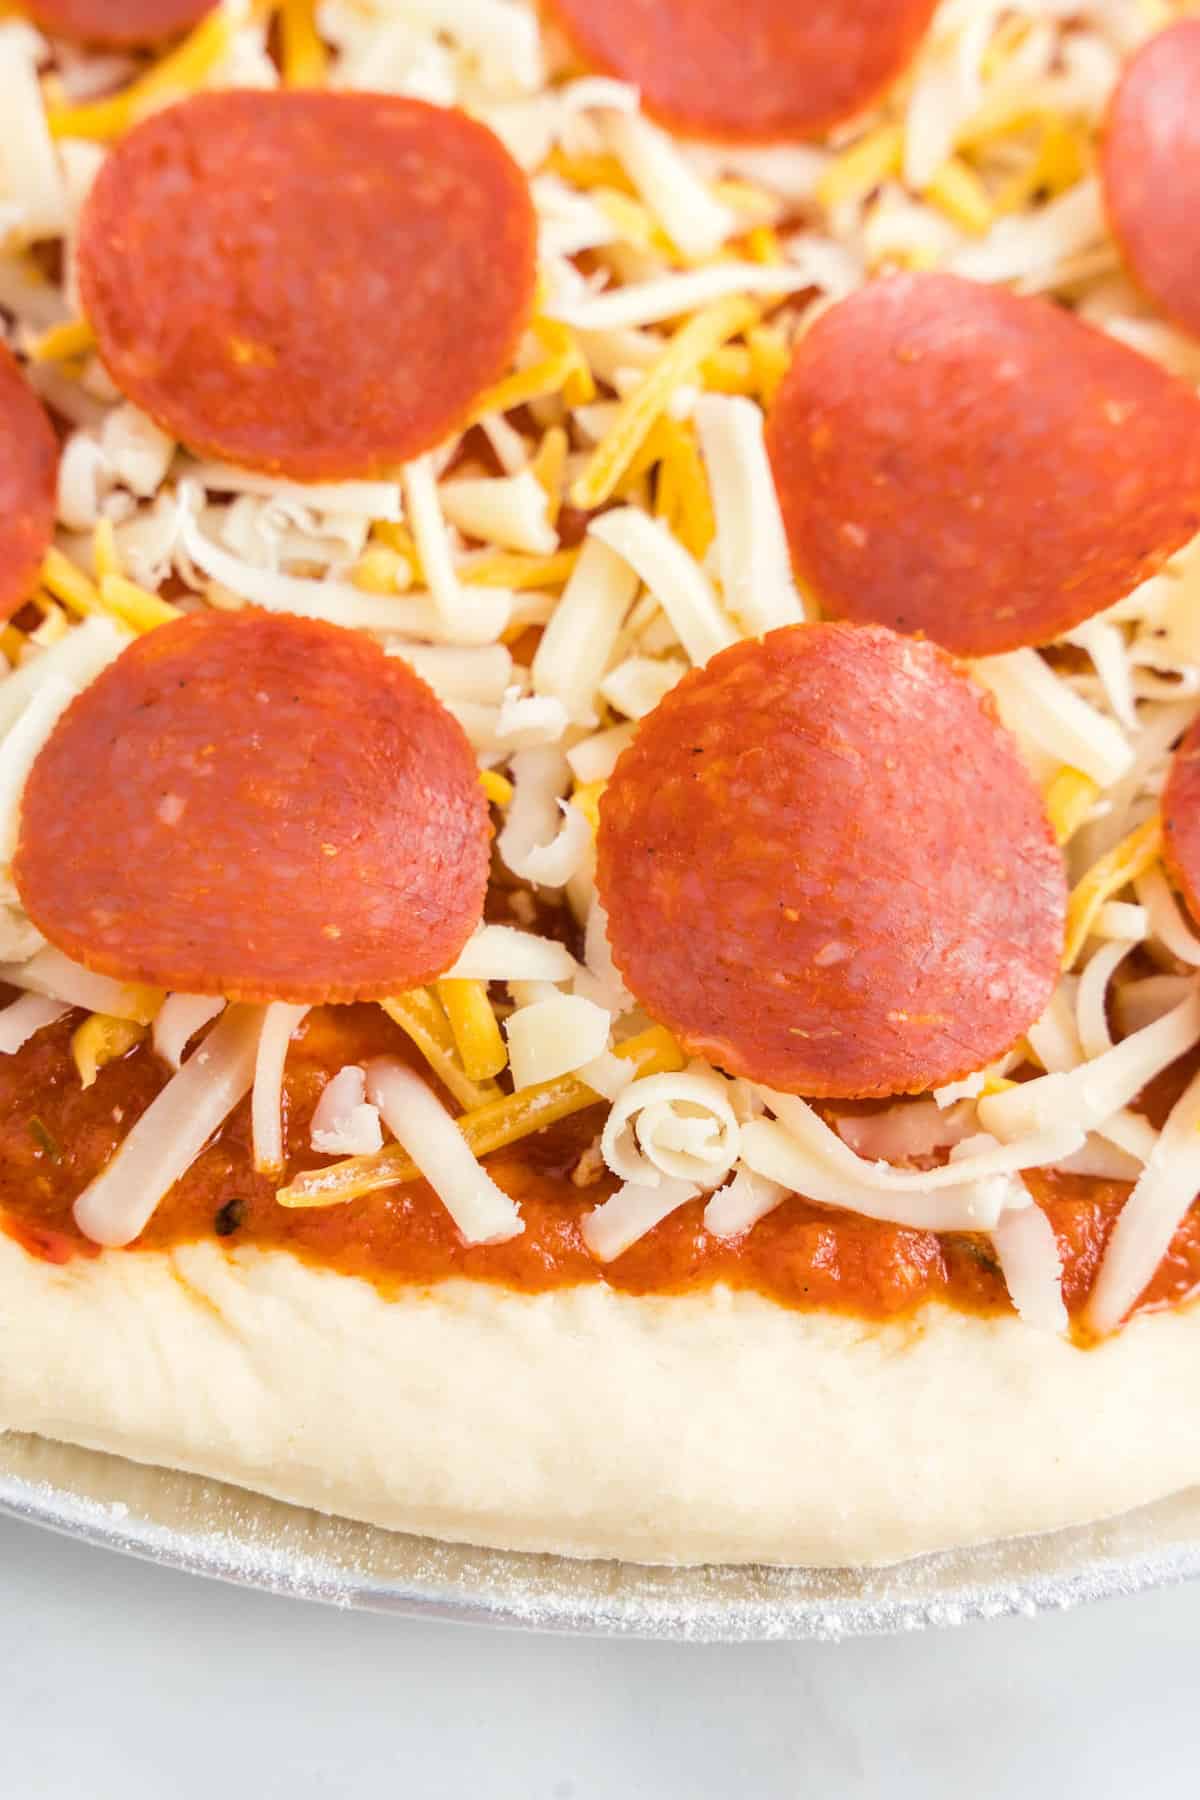 Adding Cheese and Pepperoni Toppings for Homemade Pizza